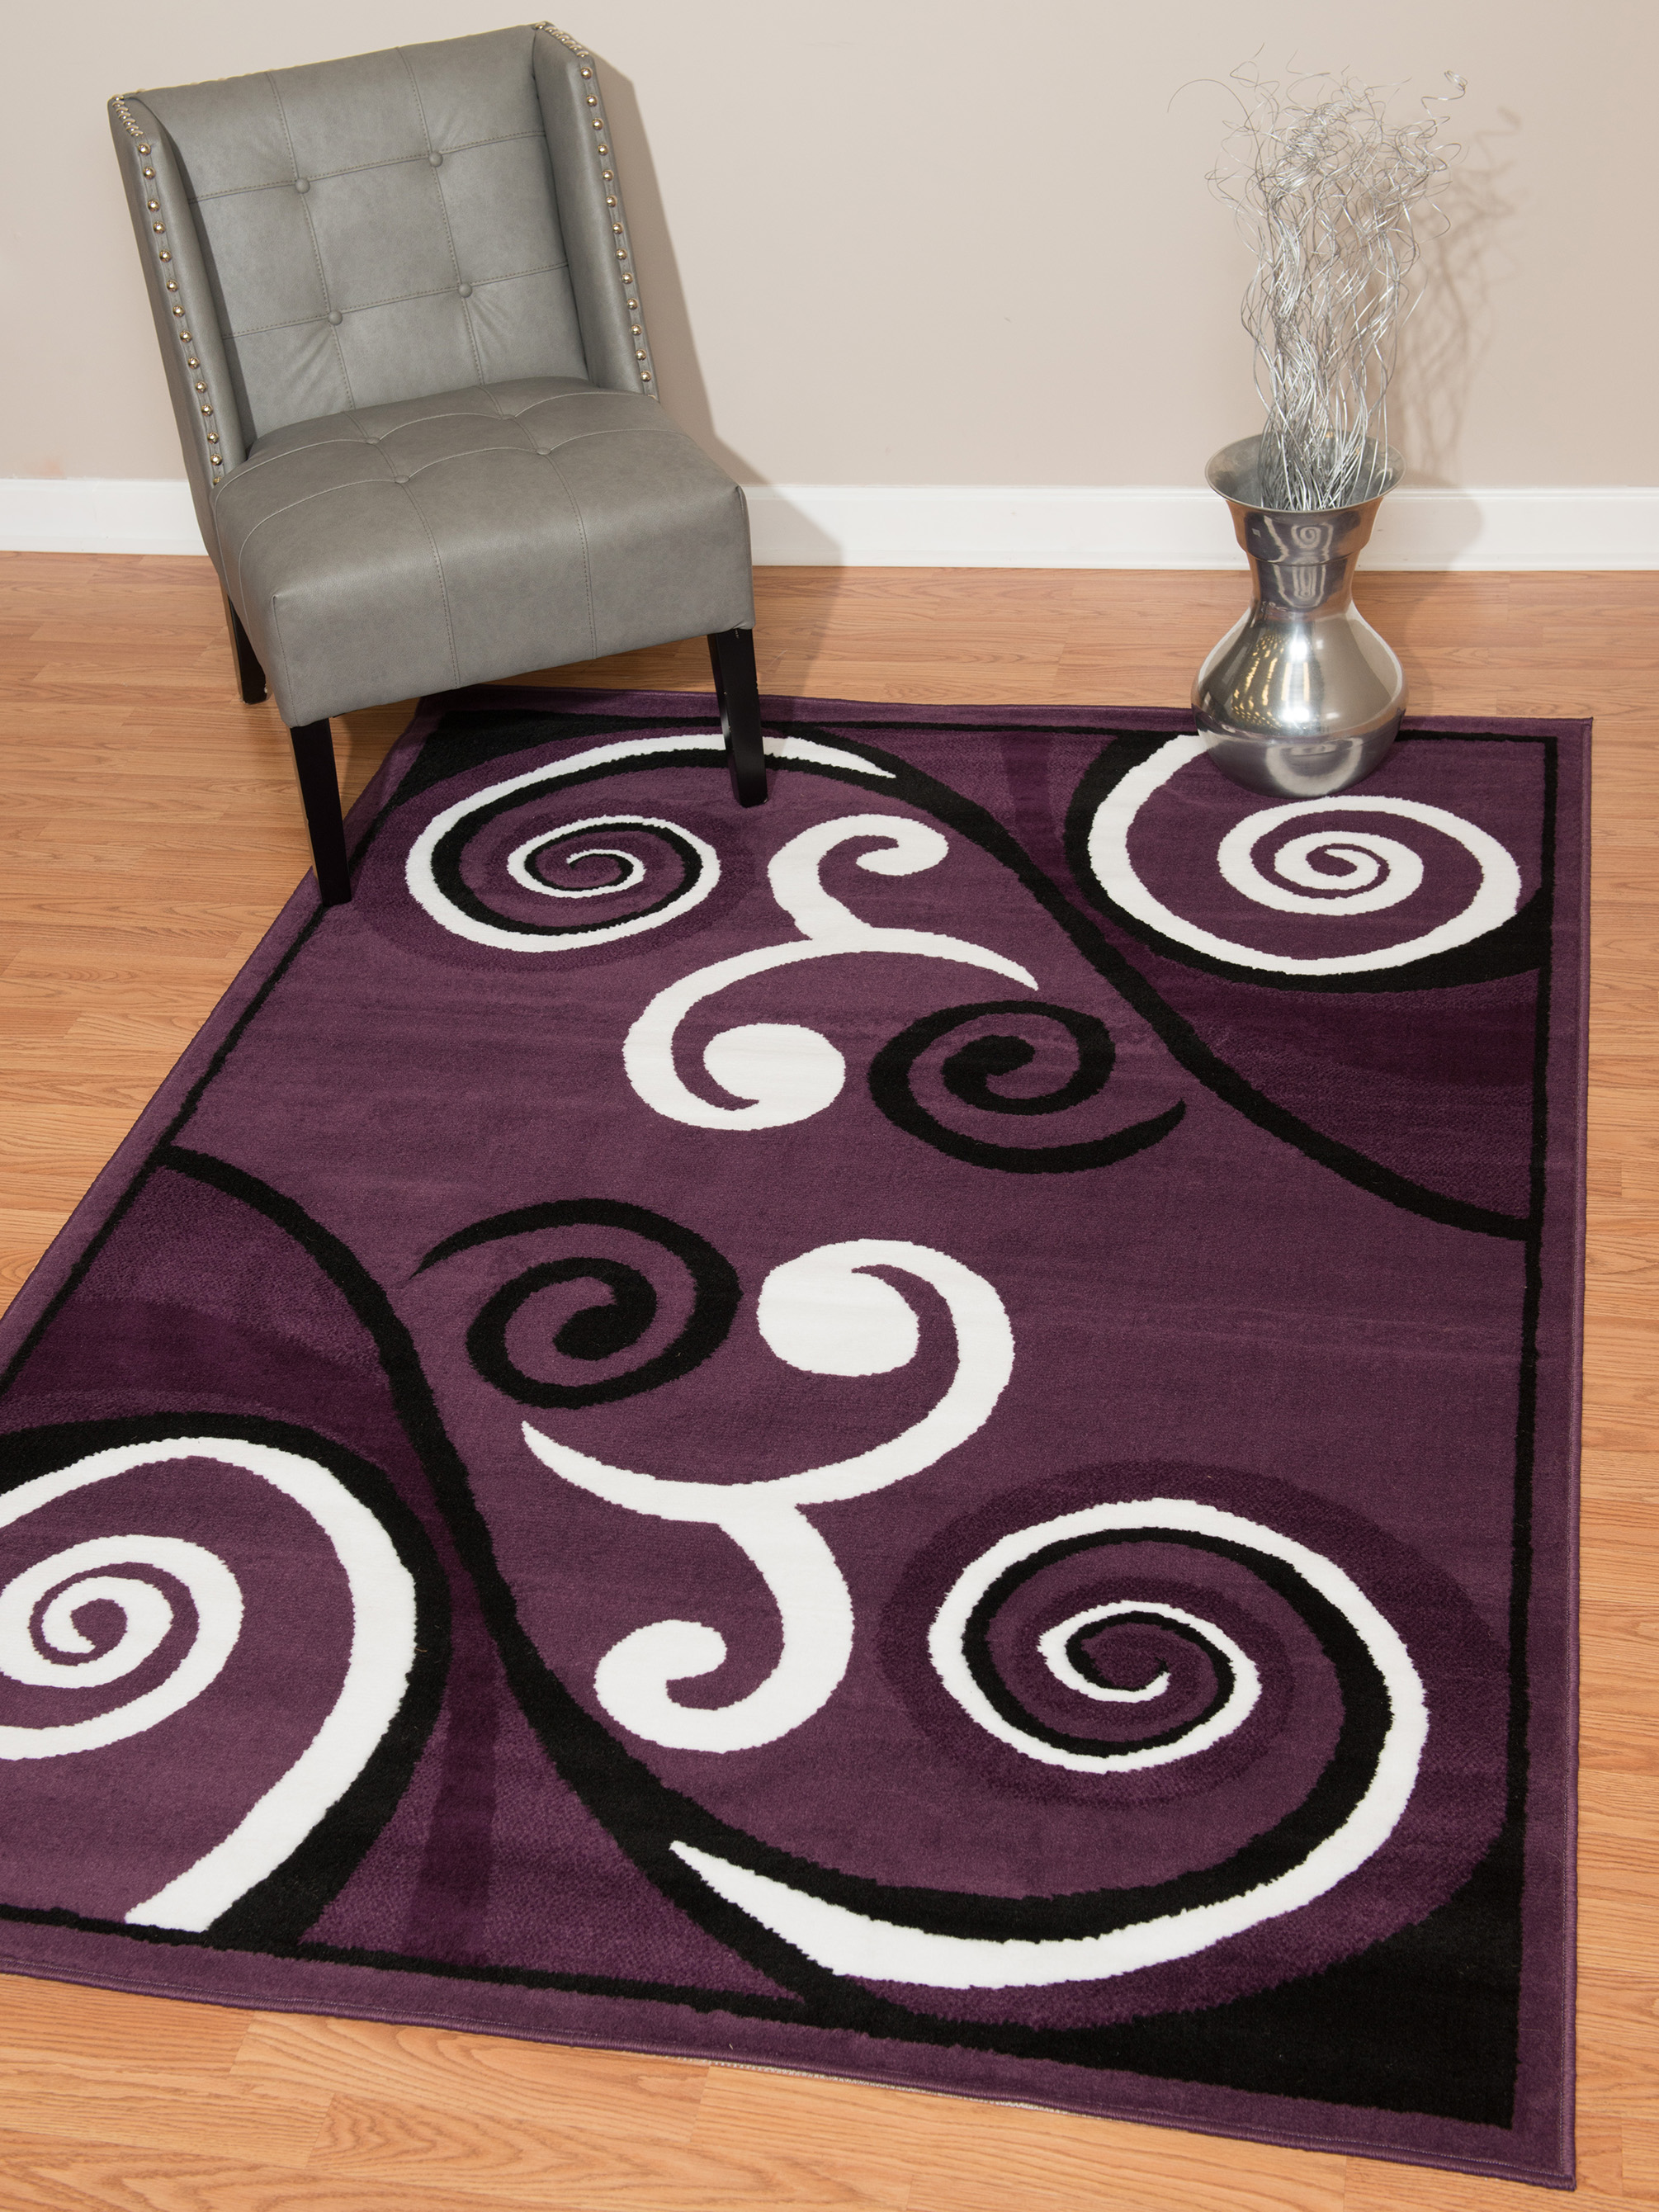 Designer Home Soft Transitional Indoor Modern Area Rug Curvy Swirls  - Actual Size: 1' 11" x  3' 3" Rectangle (Plum) - image 1 of 5